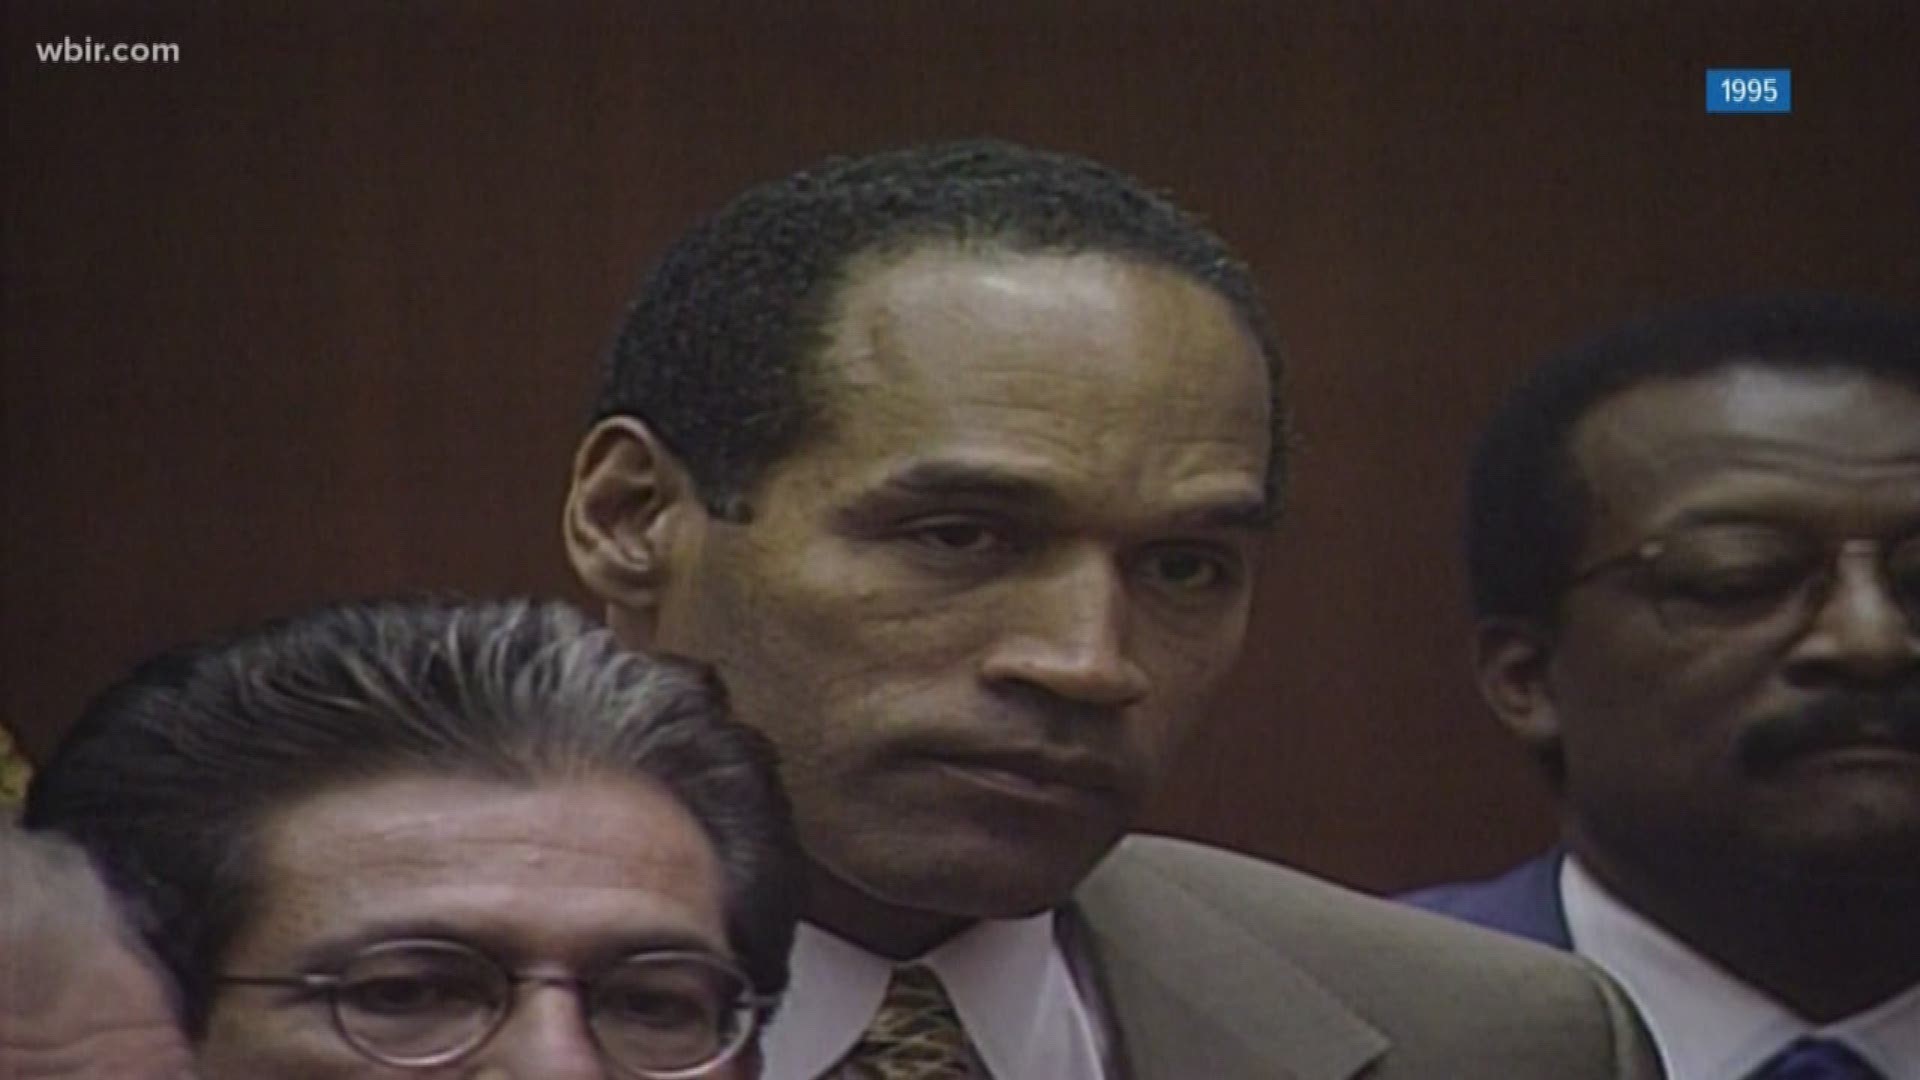 It was a double murder that became a national obsession. Some 25 years ago -- O.J. Simpson was accused of murder.